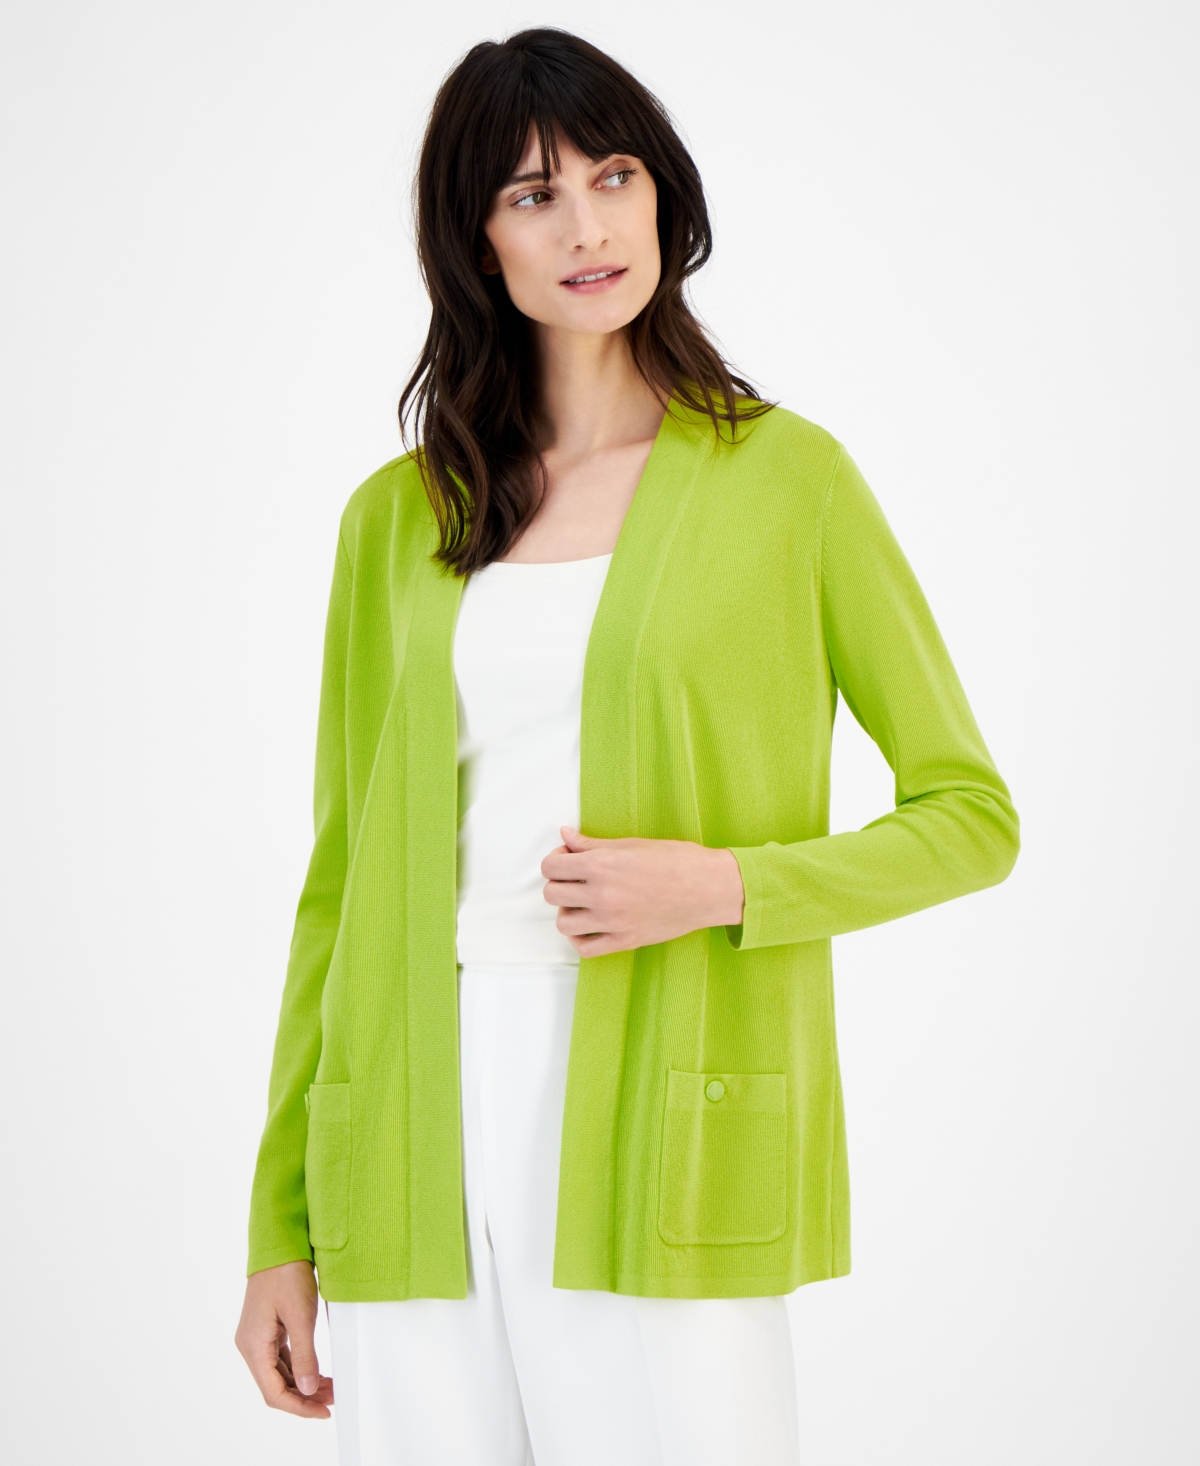 Malibu Open-Front Cardigan - Sprout